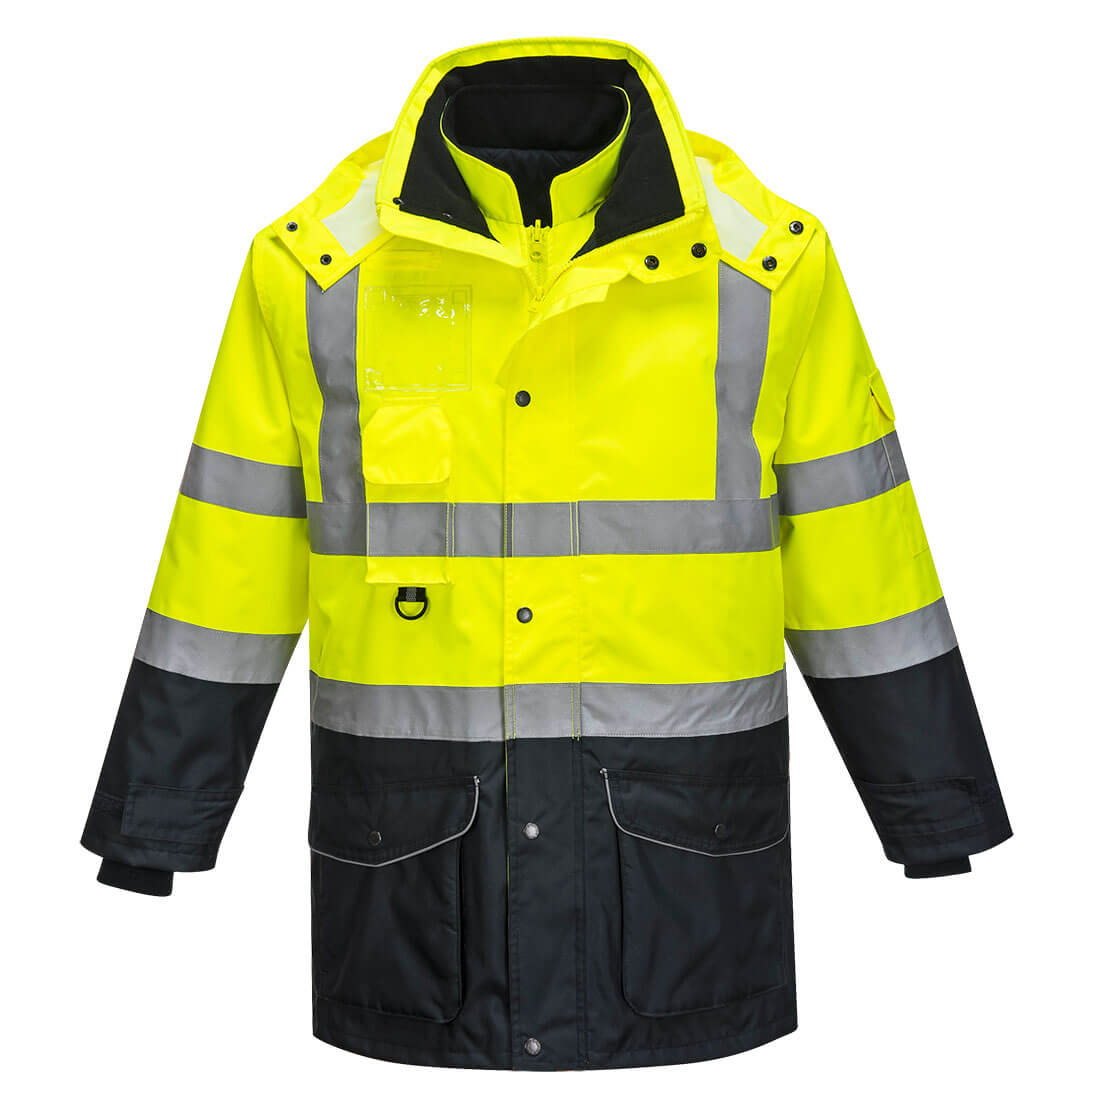 Image of Oxford Weave 300D Class 3 Hi Vis 7-in-1 Contrast Traffic Jacket Yellow / Navy 3XL